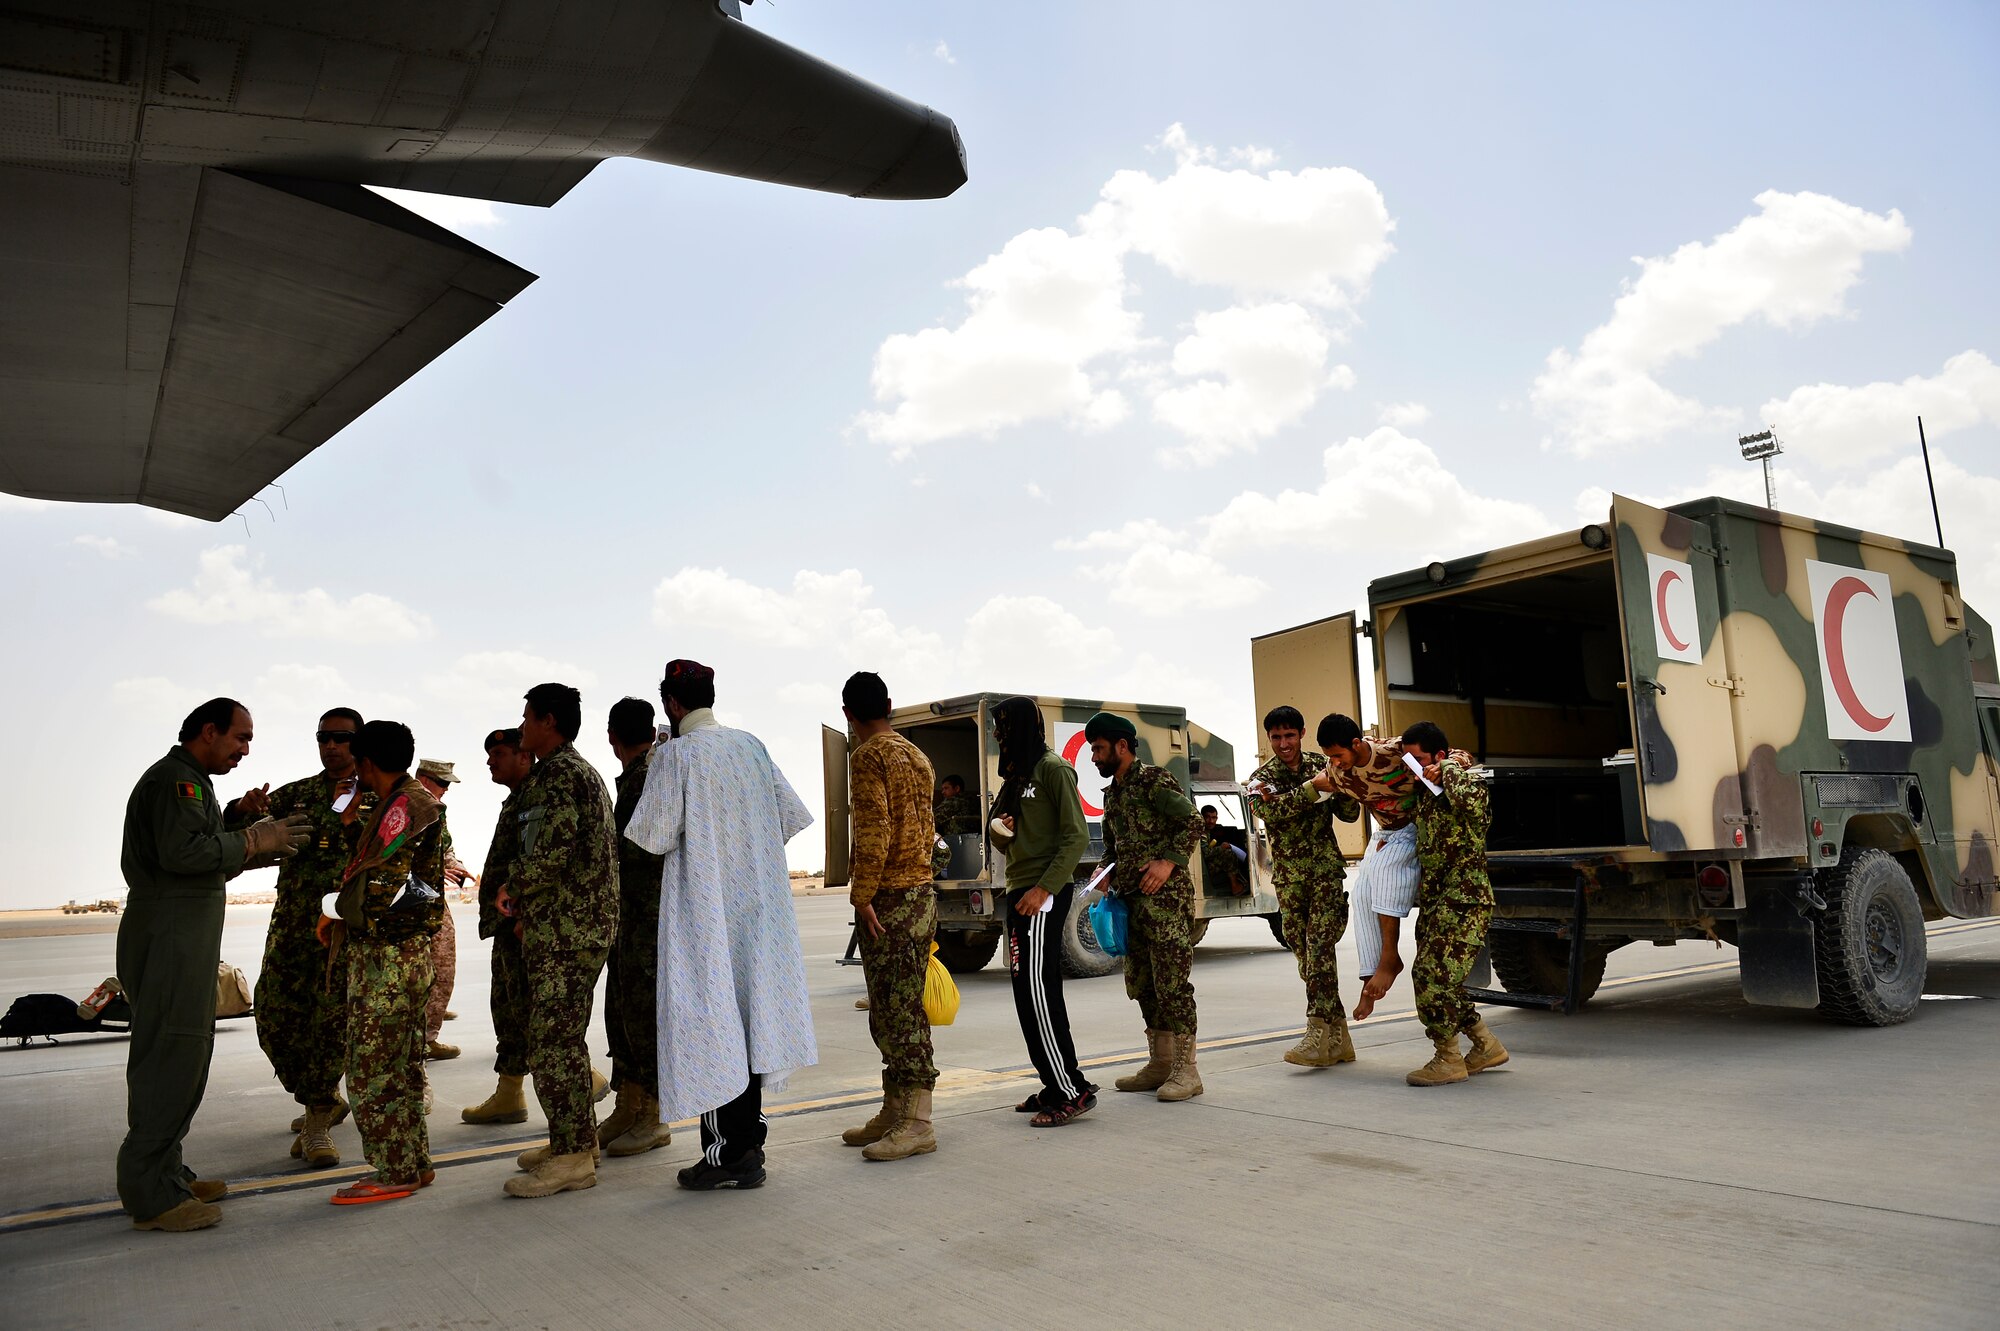 Sgt. Shanawaz Nabi Zada, Afghan Air Force loadmaster, briefs Afghan National Army soldiers prior to loading them on a C-130H1 Hercules, Camp Bastion, Afghanistan, May 19, 2014. As a loadmaster, Nabi Zada is responsible for briefing Afghan passengers on safety, enforcing in-flight standards and evenly distributing weight throughout the aircraft.  Nabi Zada has been trained by advisors assigned to the 438th Air Expeditionary Advisory Squadron. (U.S. Air Force photo by Staff Sgt. Vernon Young Jr.)